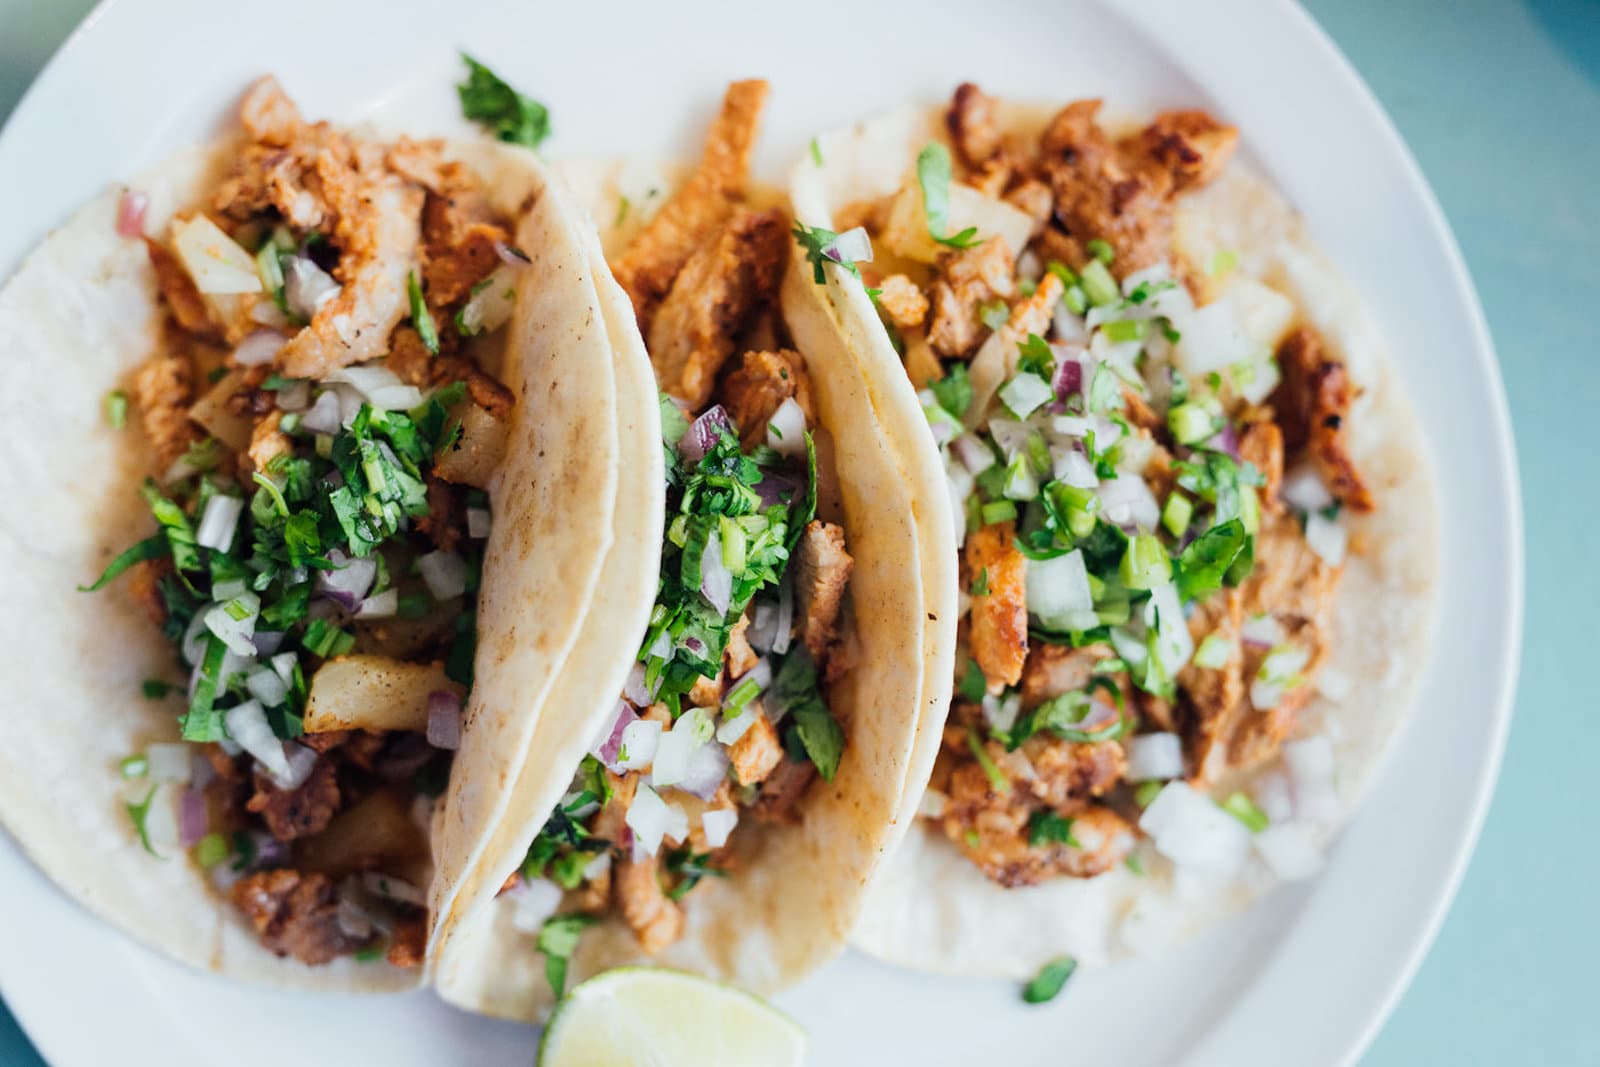 The Best Tacos in Montreal: Our suggestions